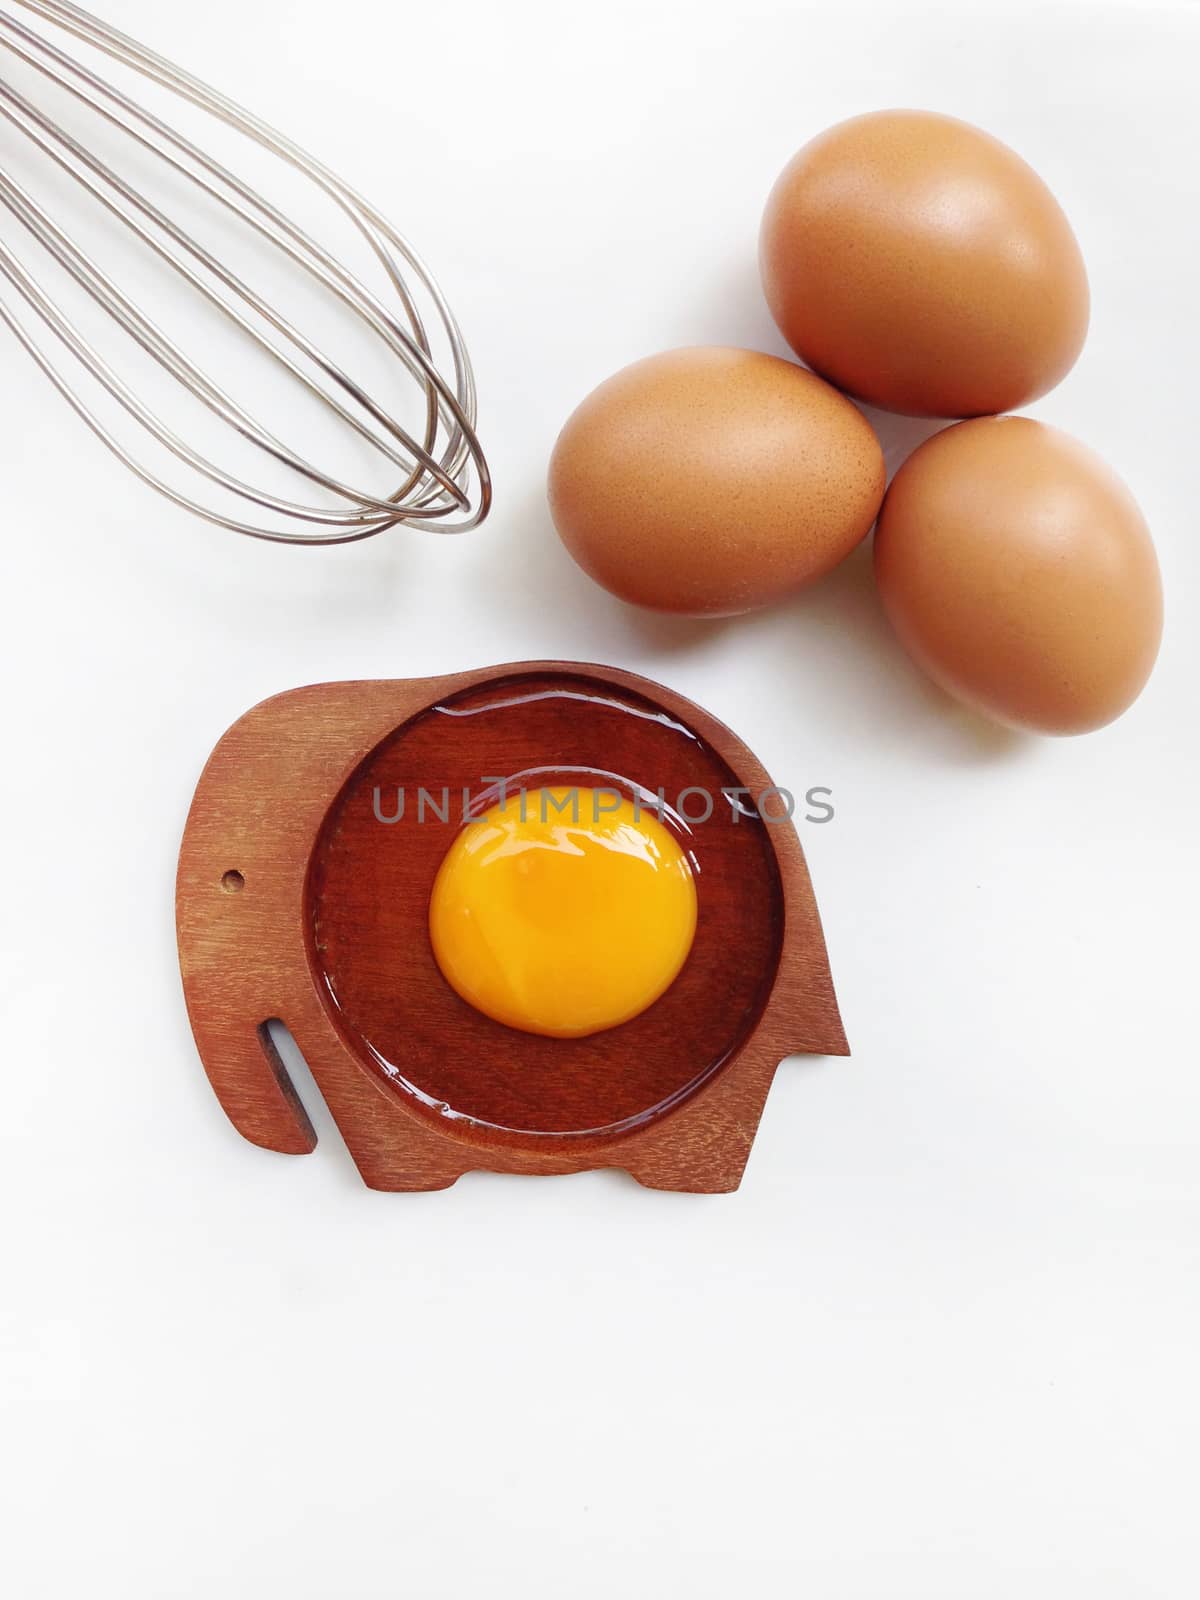 Egg yolk on wooden elephant shaped saucer with eggs and egg whisk on white background